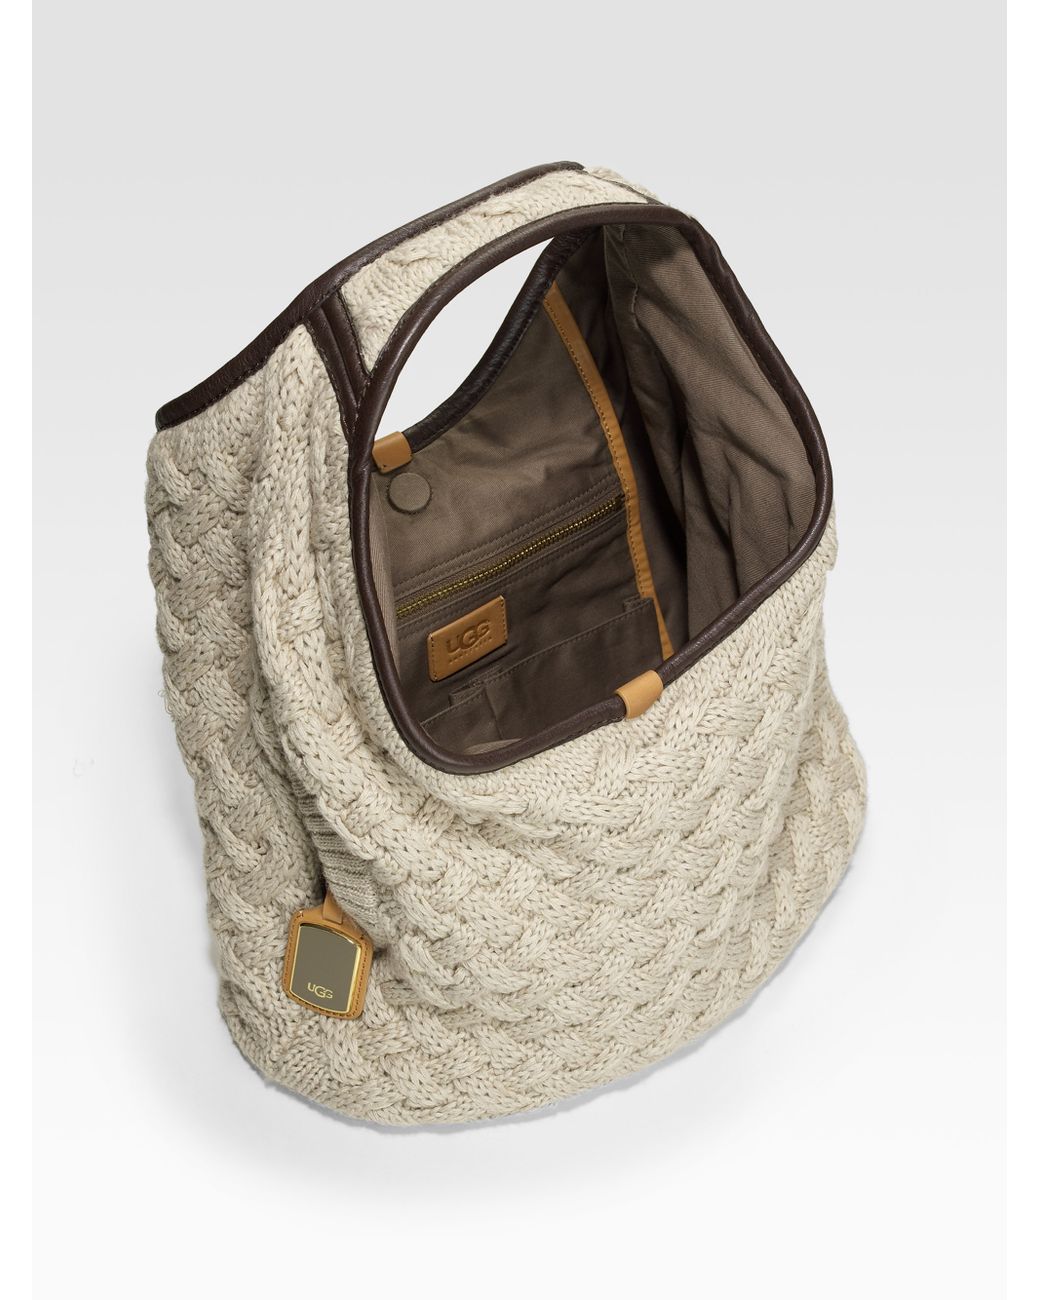 UGG Knit Wool Hobo Bag in Natural | Lyst